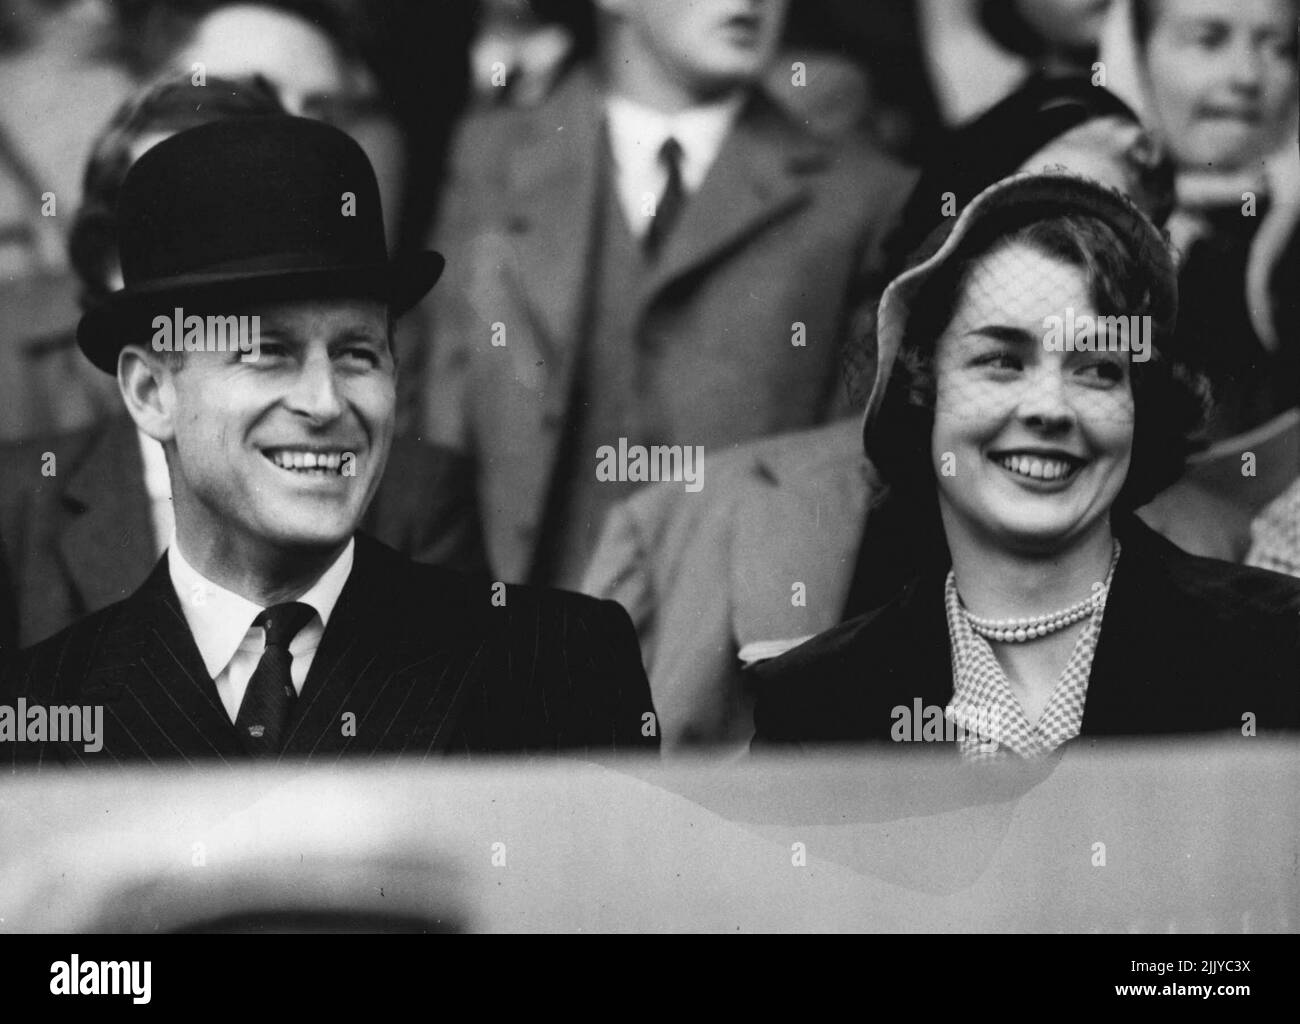 The Edinburgh Festival Opens Photo Shows:- The Duke of Edinburgh with Miss Jane McNeill in the Grandstand at Edinburgh yesterday. Miss McNeill's Engagement to the Earl of Dalkeith was announced recently. August 18, 1952. (Photo by Paul Popper) Stock Photo